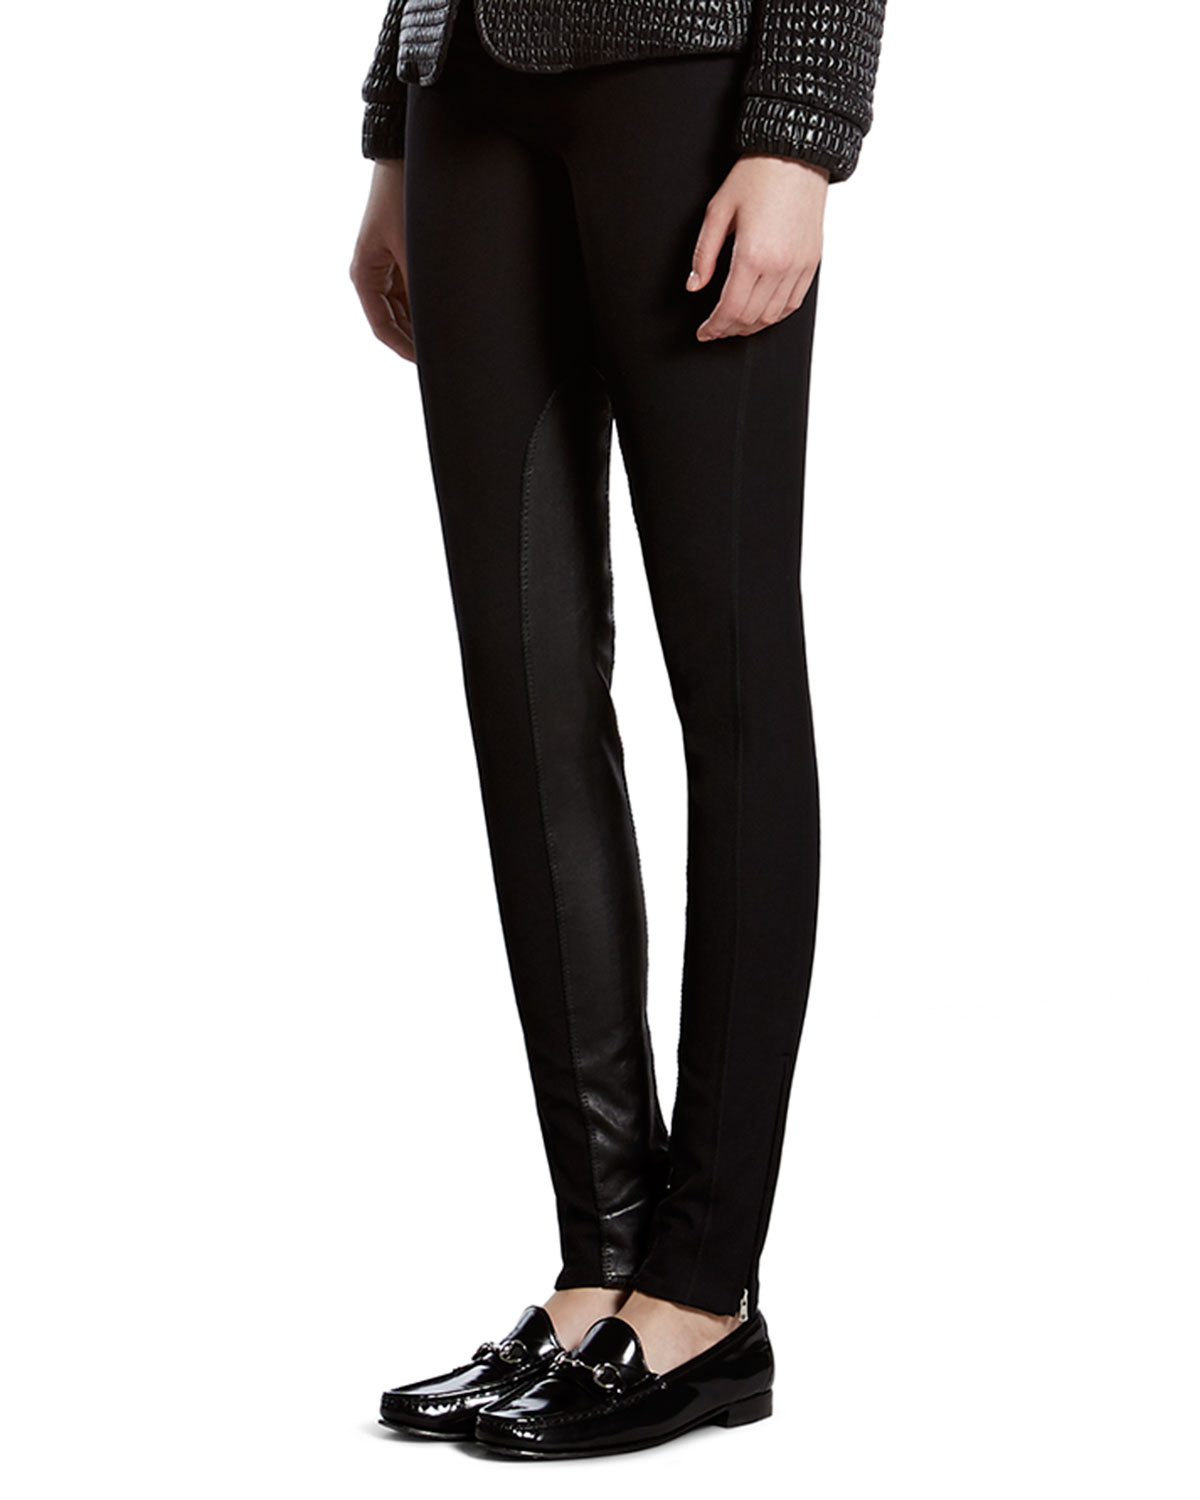 Lyst - Gucci Black Stretch Pants With Leather Detail in Black